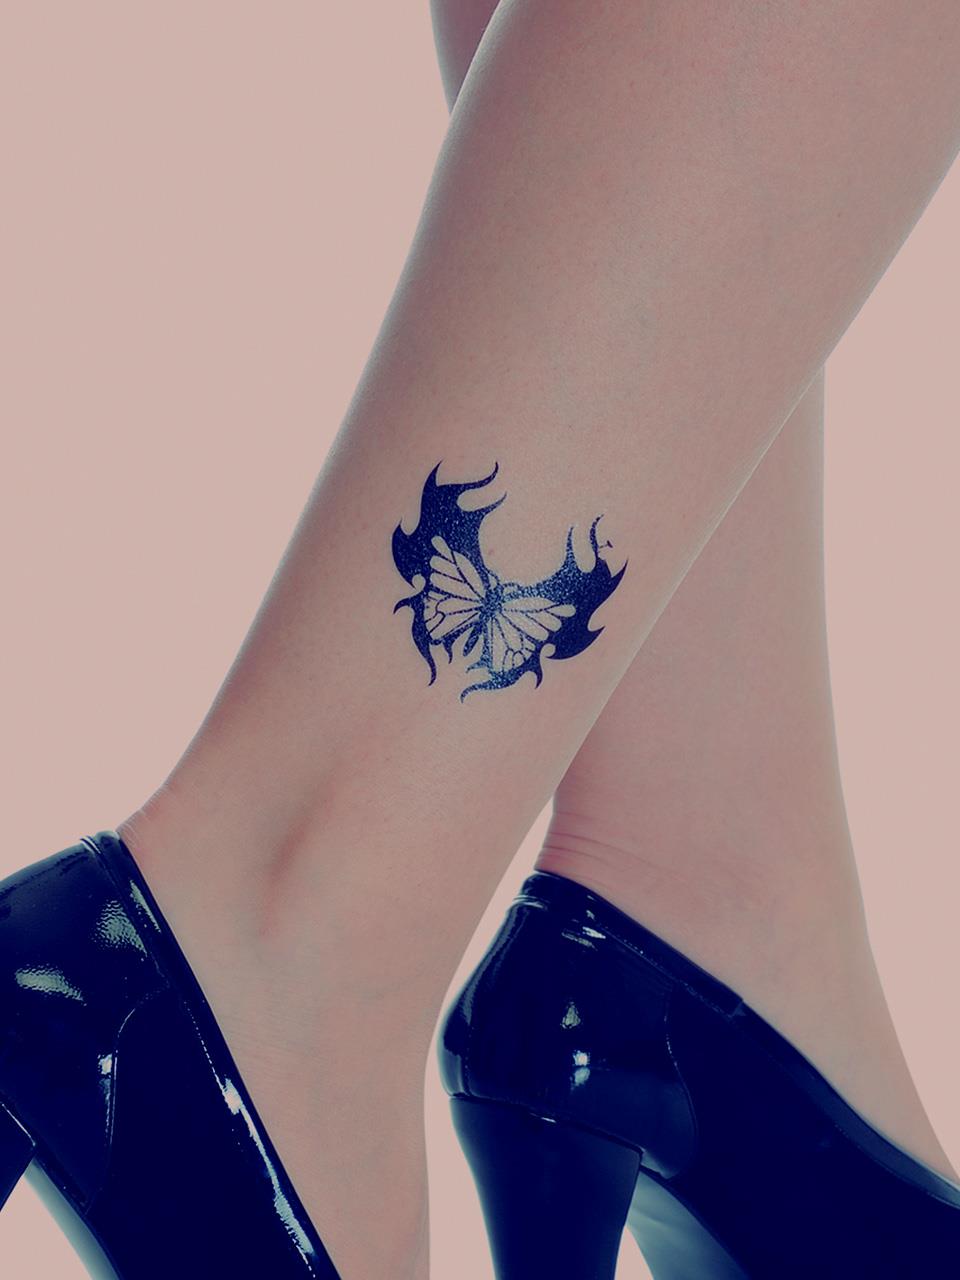 Classy Leg Tattoo Designs That You Can Flaunt